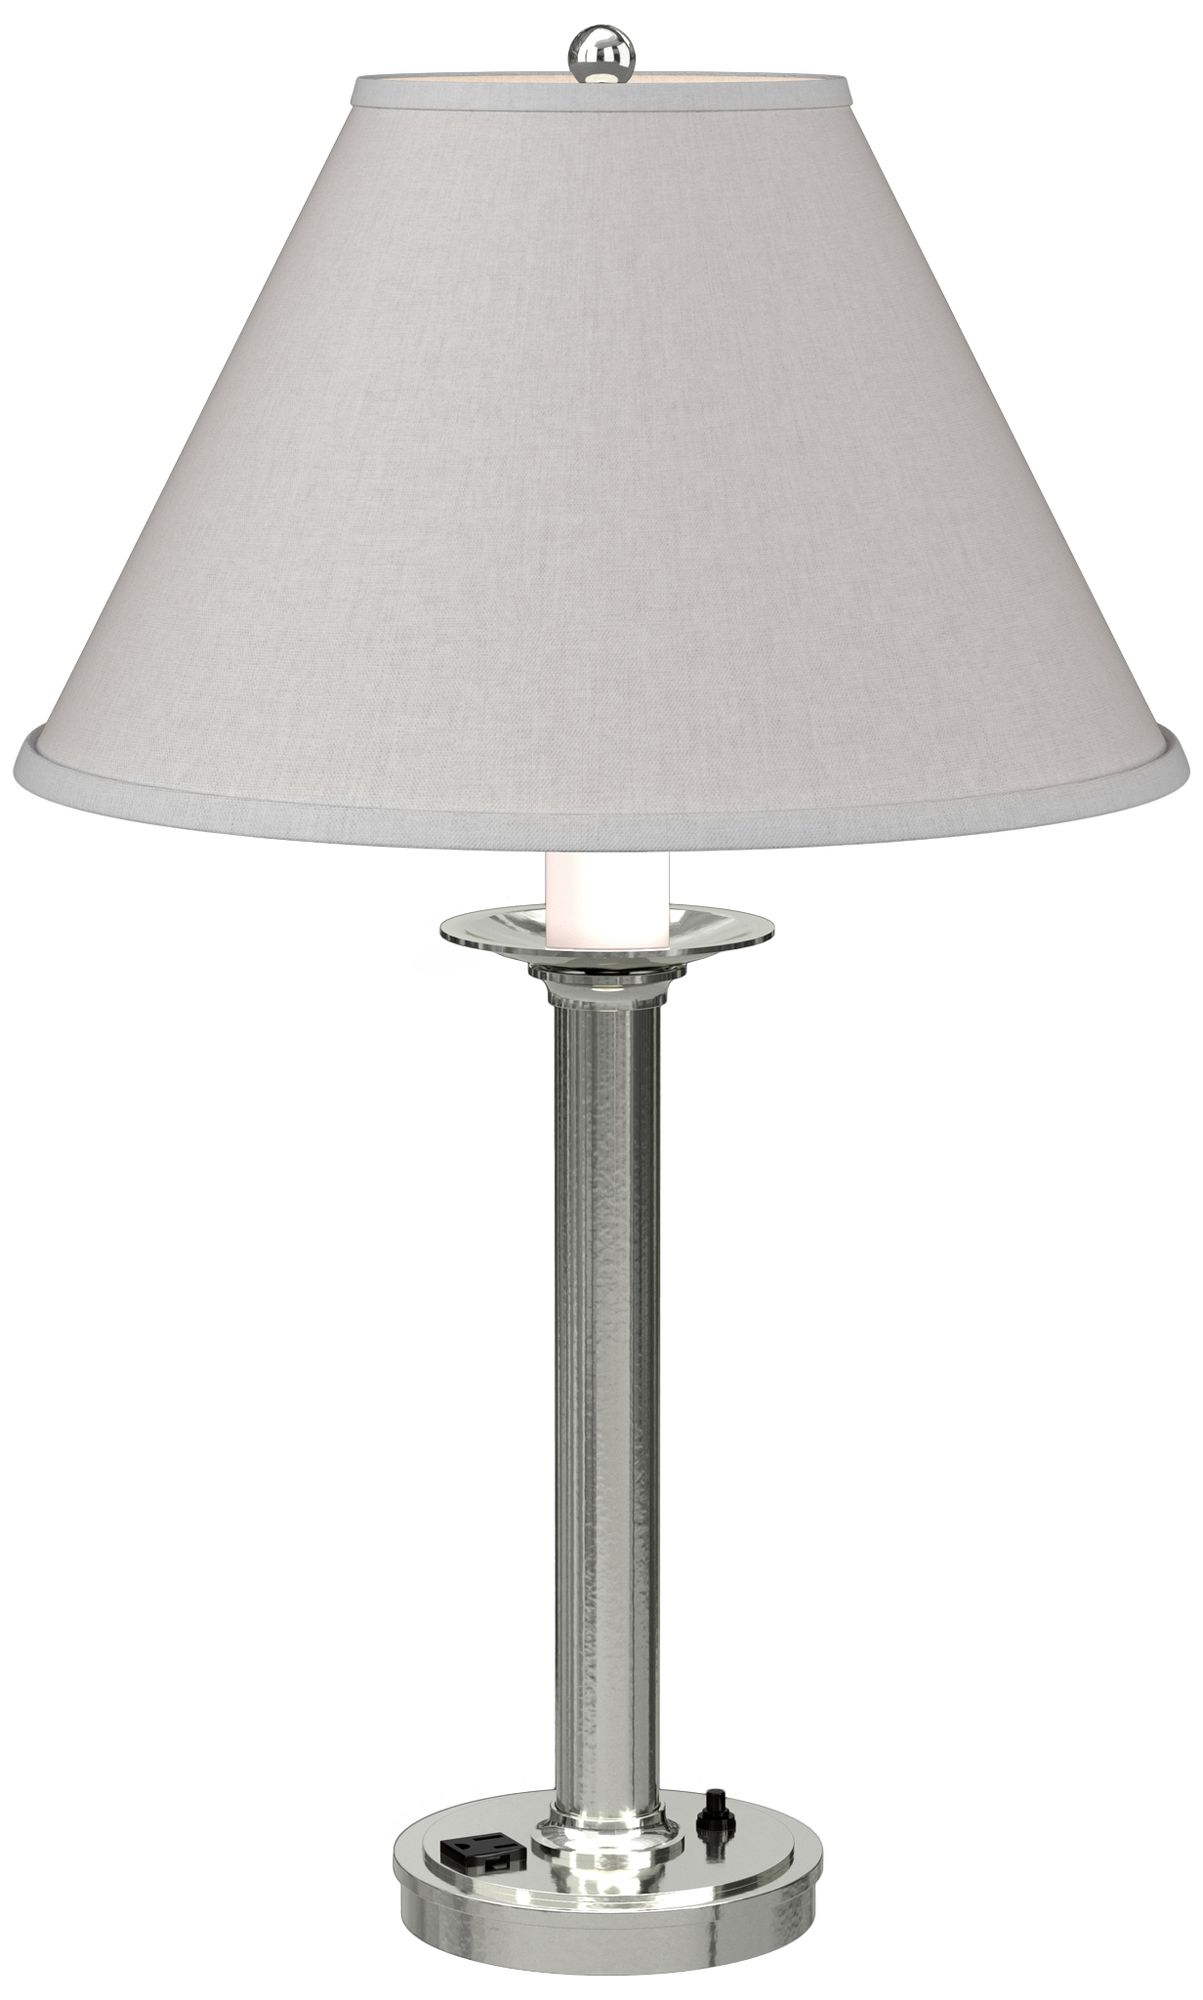 Simple Lines 27" High Sterling Table Lamp With Light Grey Shade